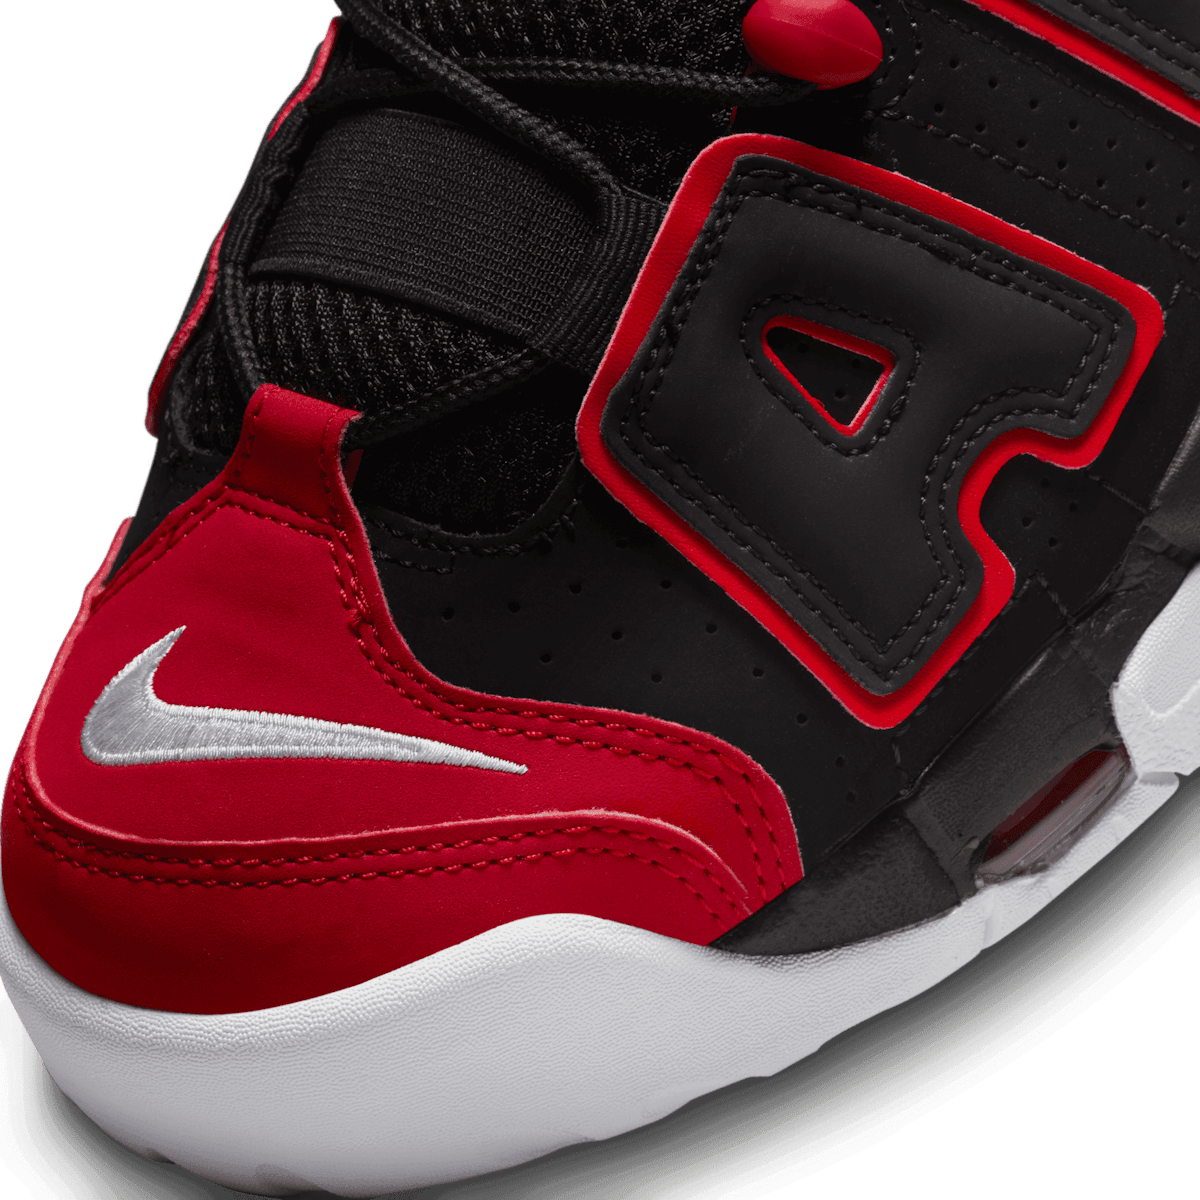 Nike Air More Uptempo Red Toe Angle 4